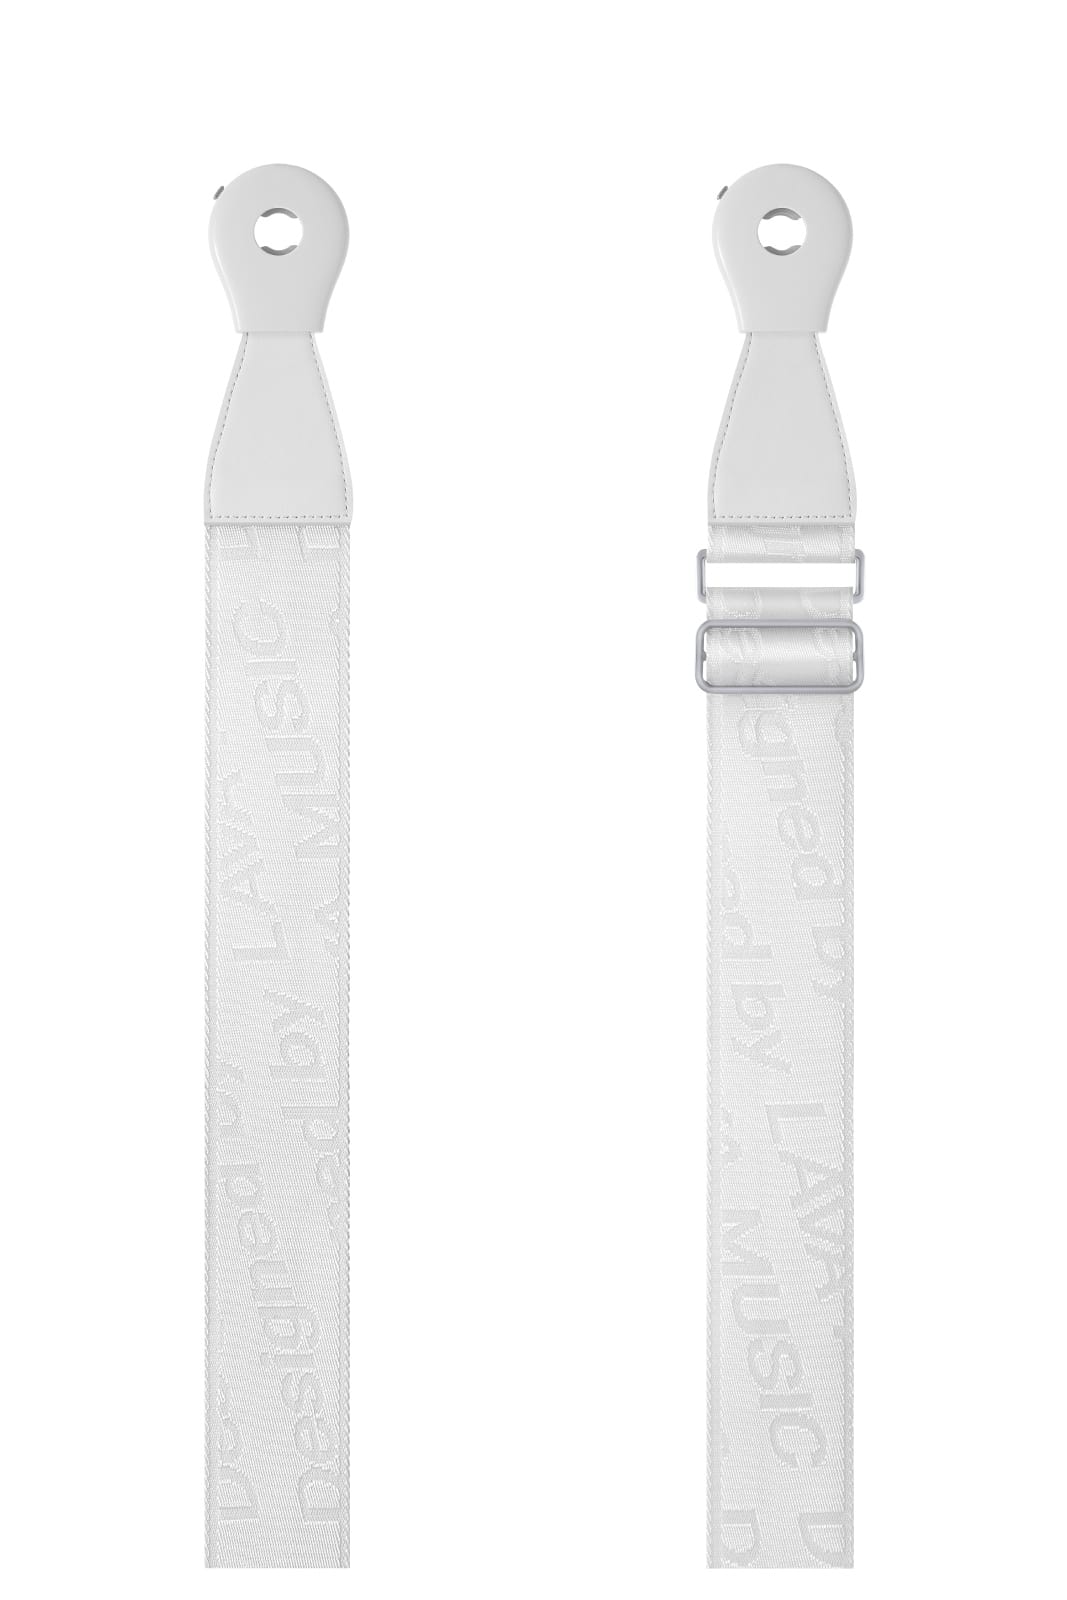 LAVA MUSIC IDEAL STRAP 2 FOR LAVA ME PLAY - WOVEN WHITE